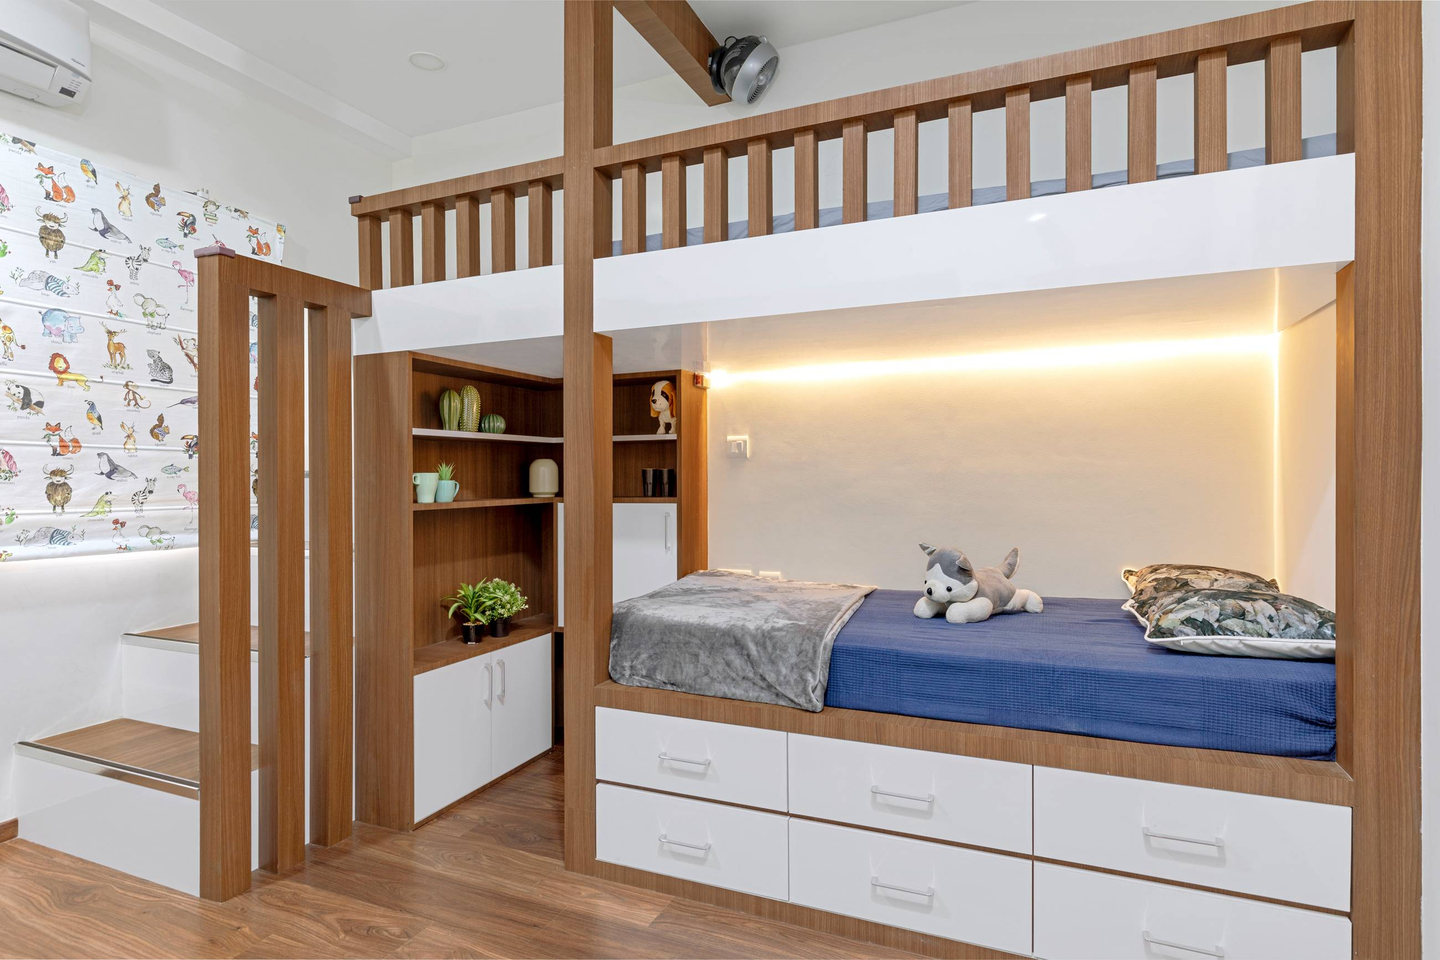 Kids' Room With A Wooden Bunk Bed With Built-In Open And Closed Storage - Livspace